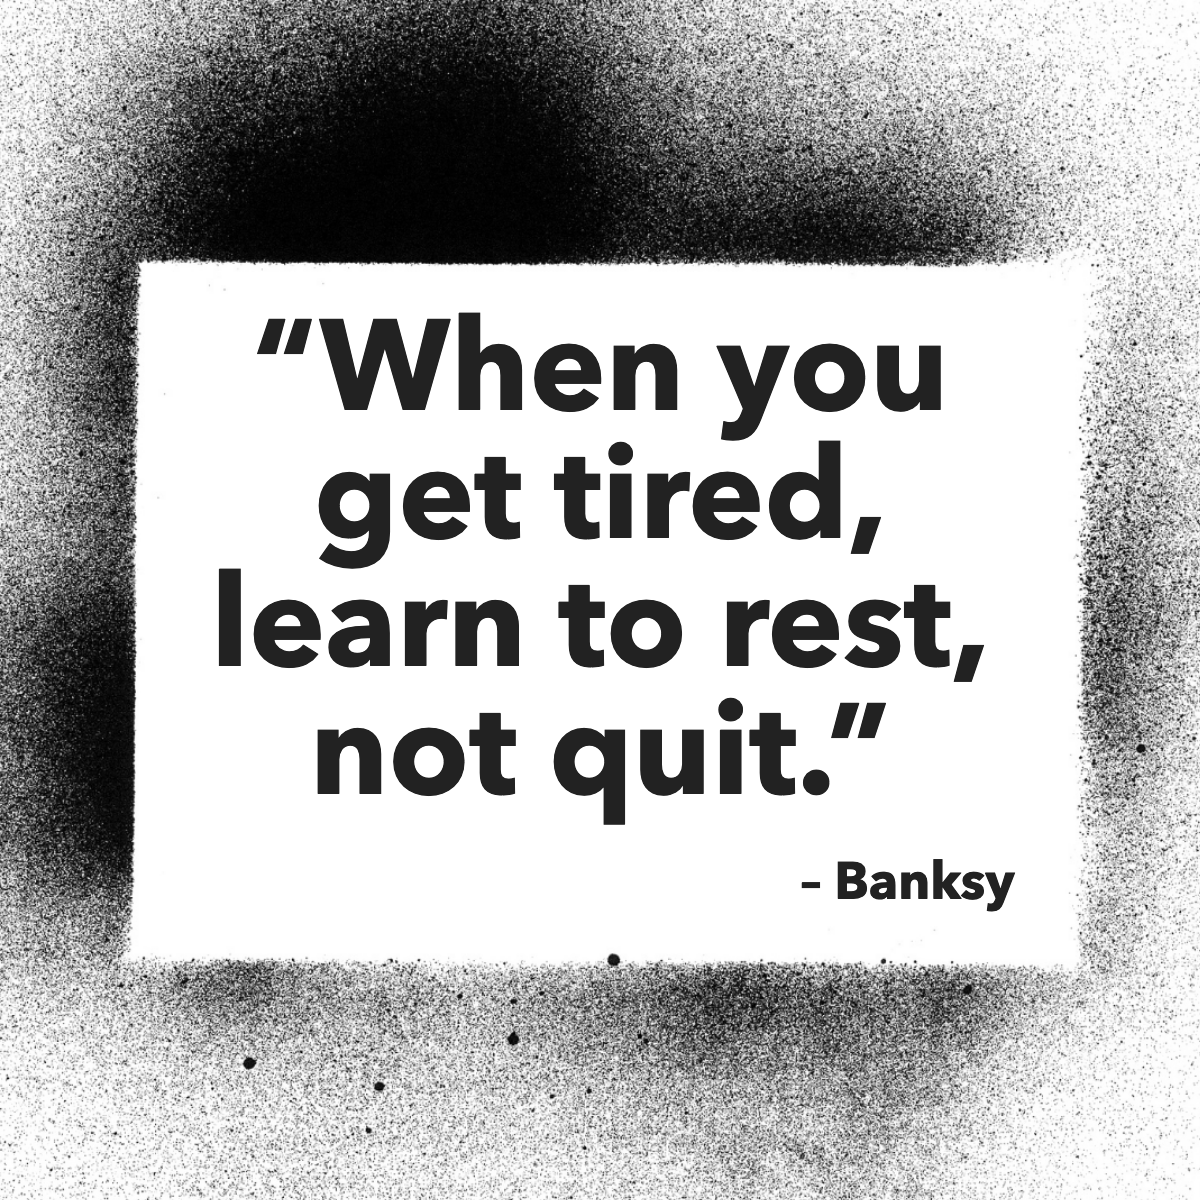 Don't feel guilty if you ever get tired, take your time ... 😉 #motivationnation #motivationalquotesdaily #quoteoftheday #quoteofday #quotedaily #premierrealestatenetwork #pren #realestate #realtor #prescottquadcity #sedonaverdevalley #veronicamorrow #myhomegroup